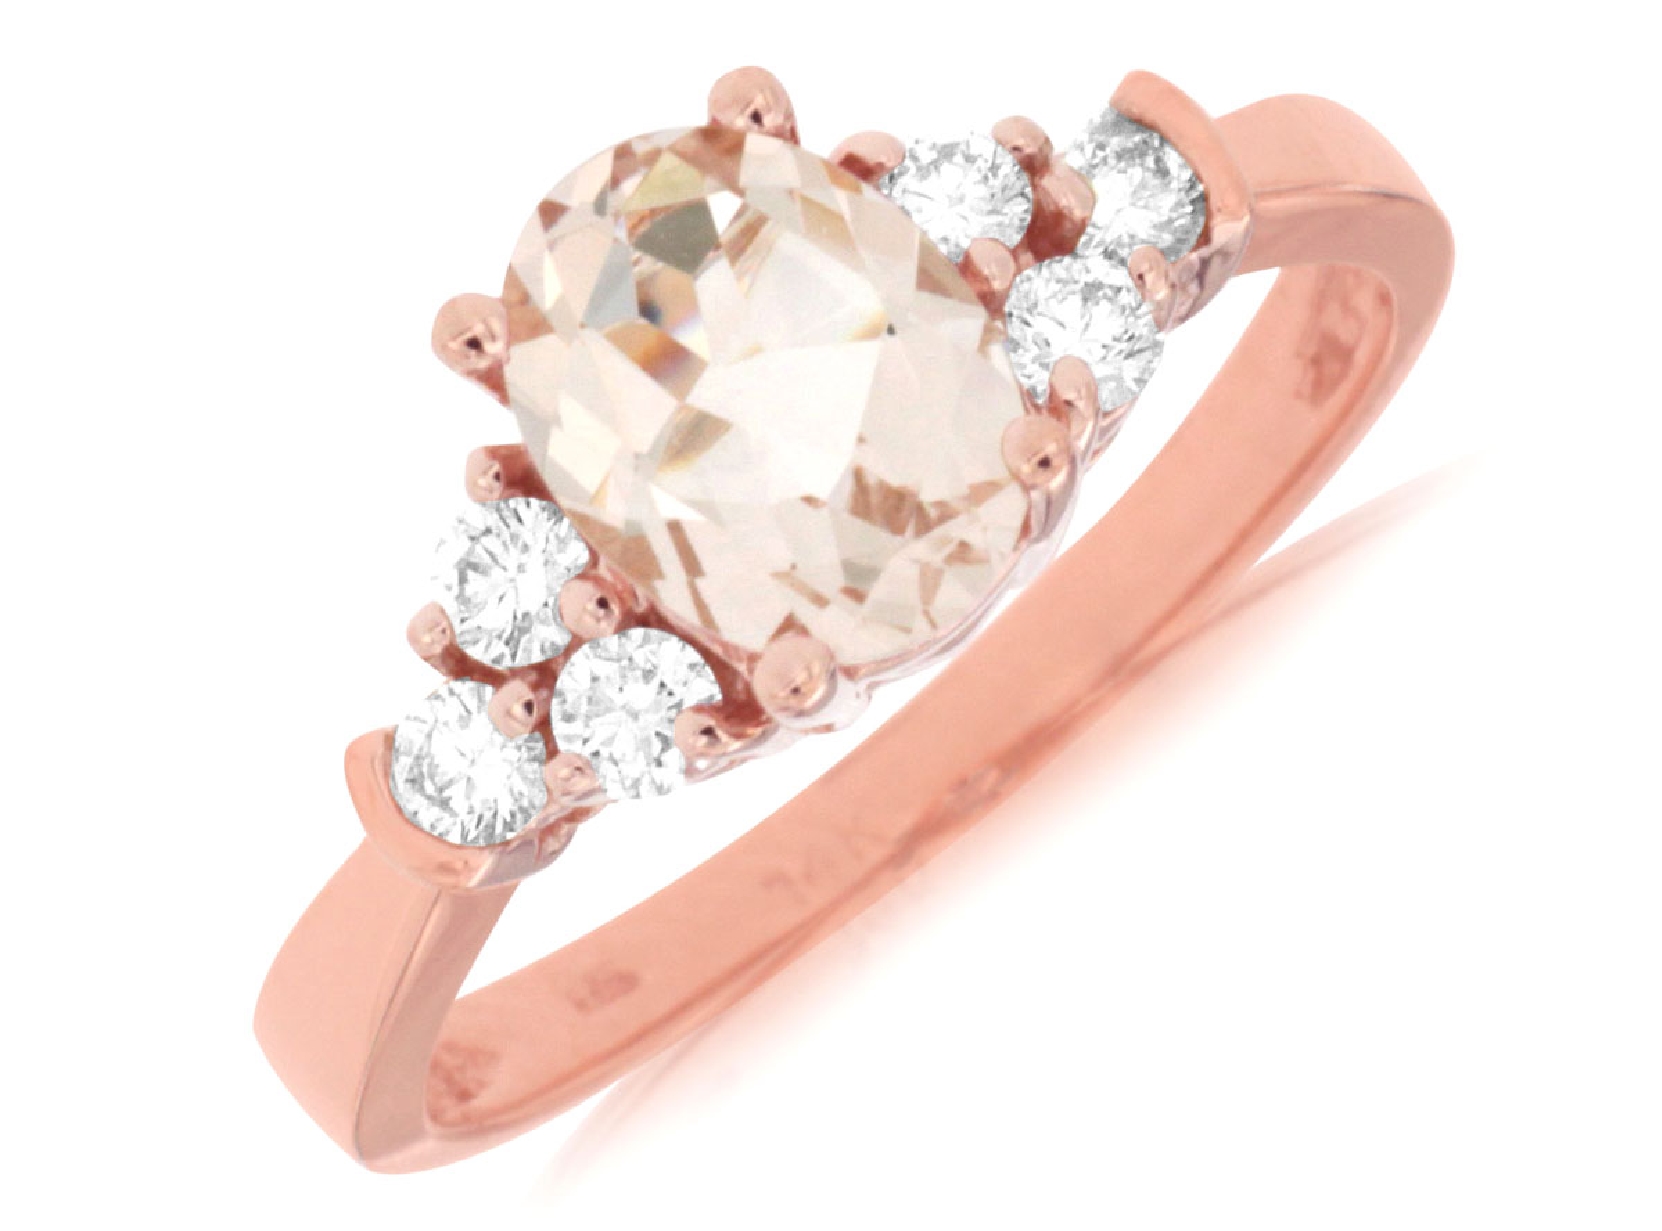 14K Rose Gold Oval Morganite Ring with Diamond Accents; Size 7
1.0CT Morganite
0.32CTTW Diamonds